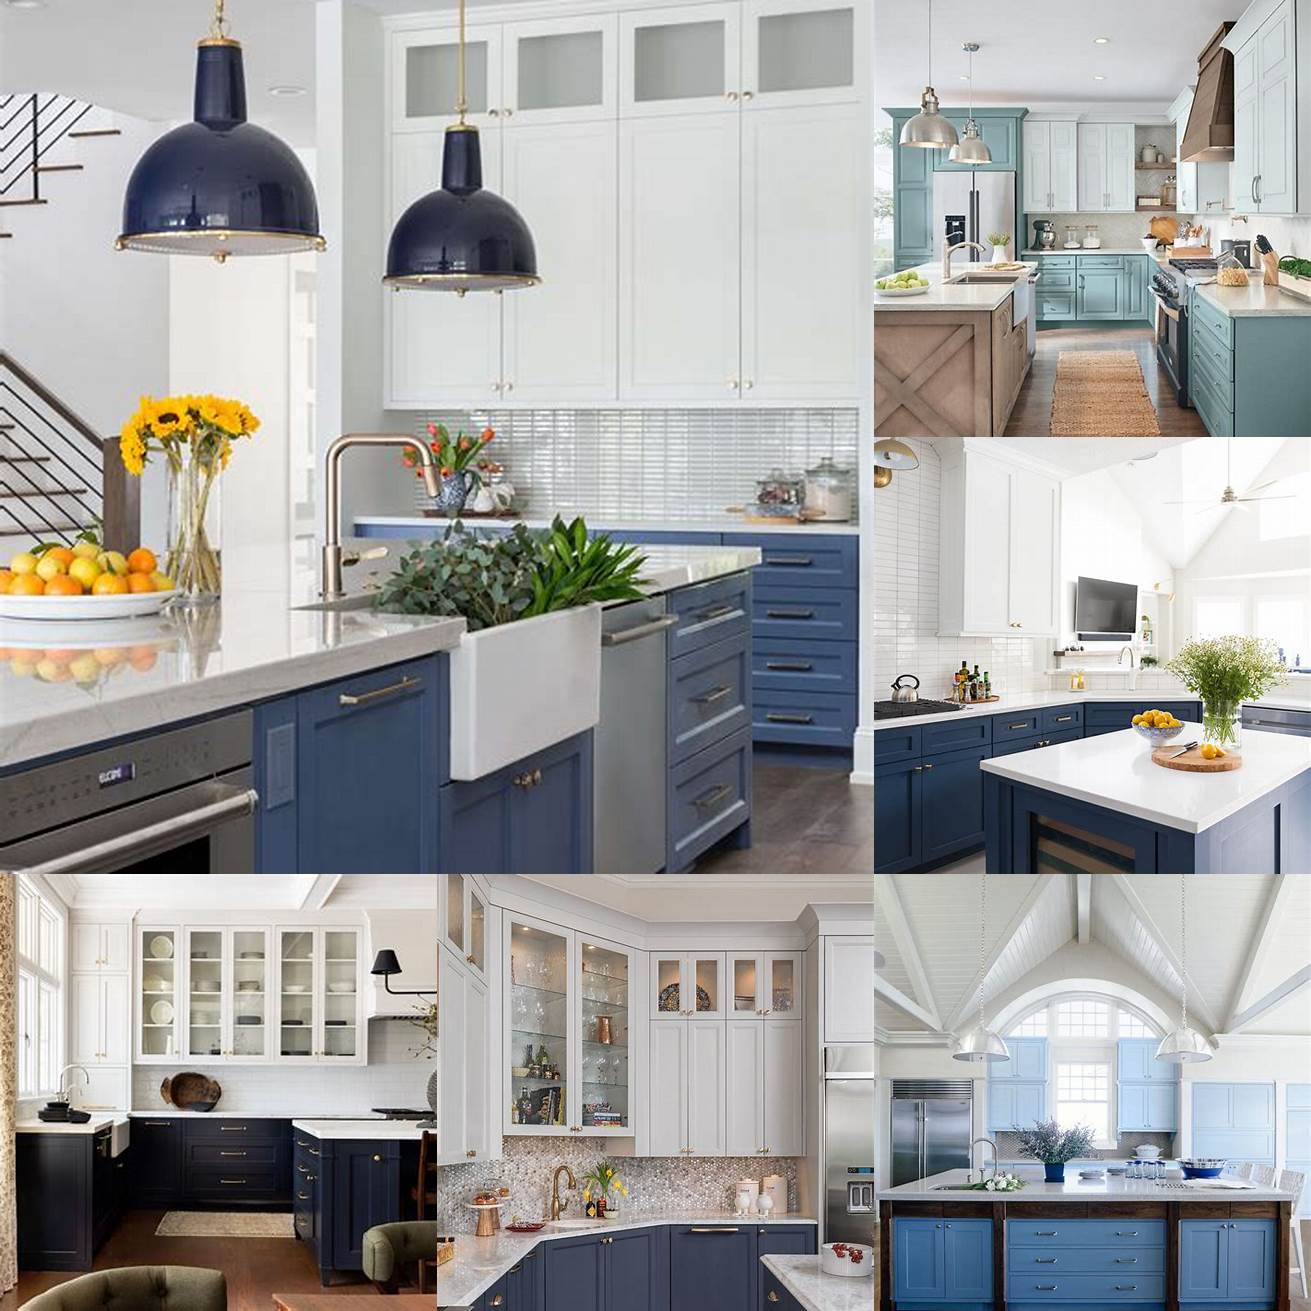 Two-toned blue kitchen